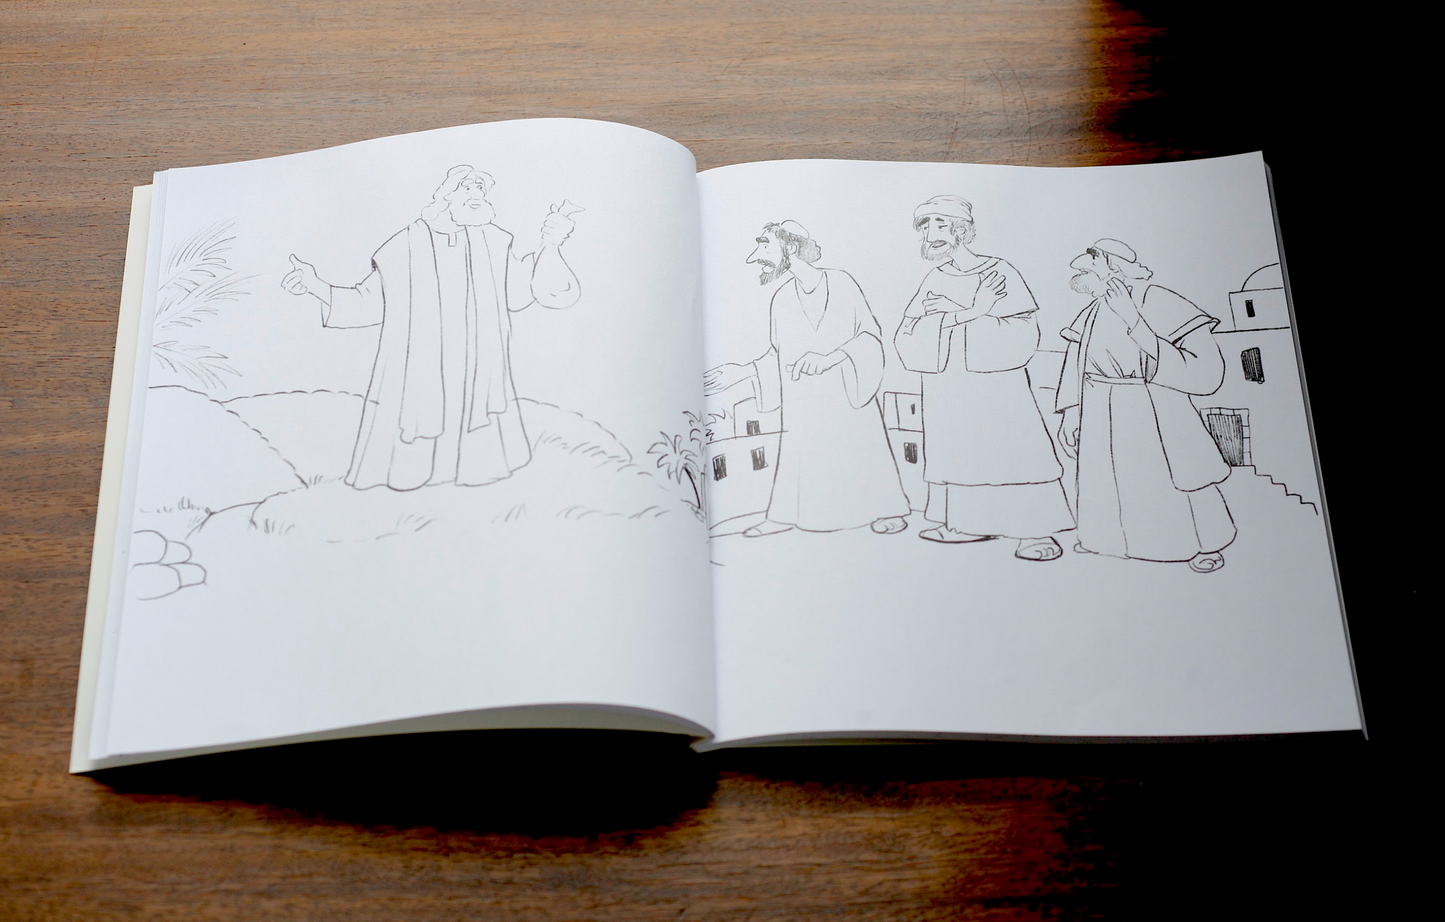 The Parables of Jesus Coloring Book